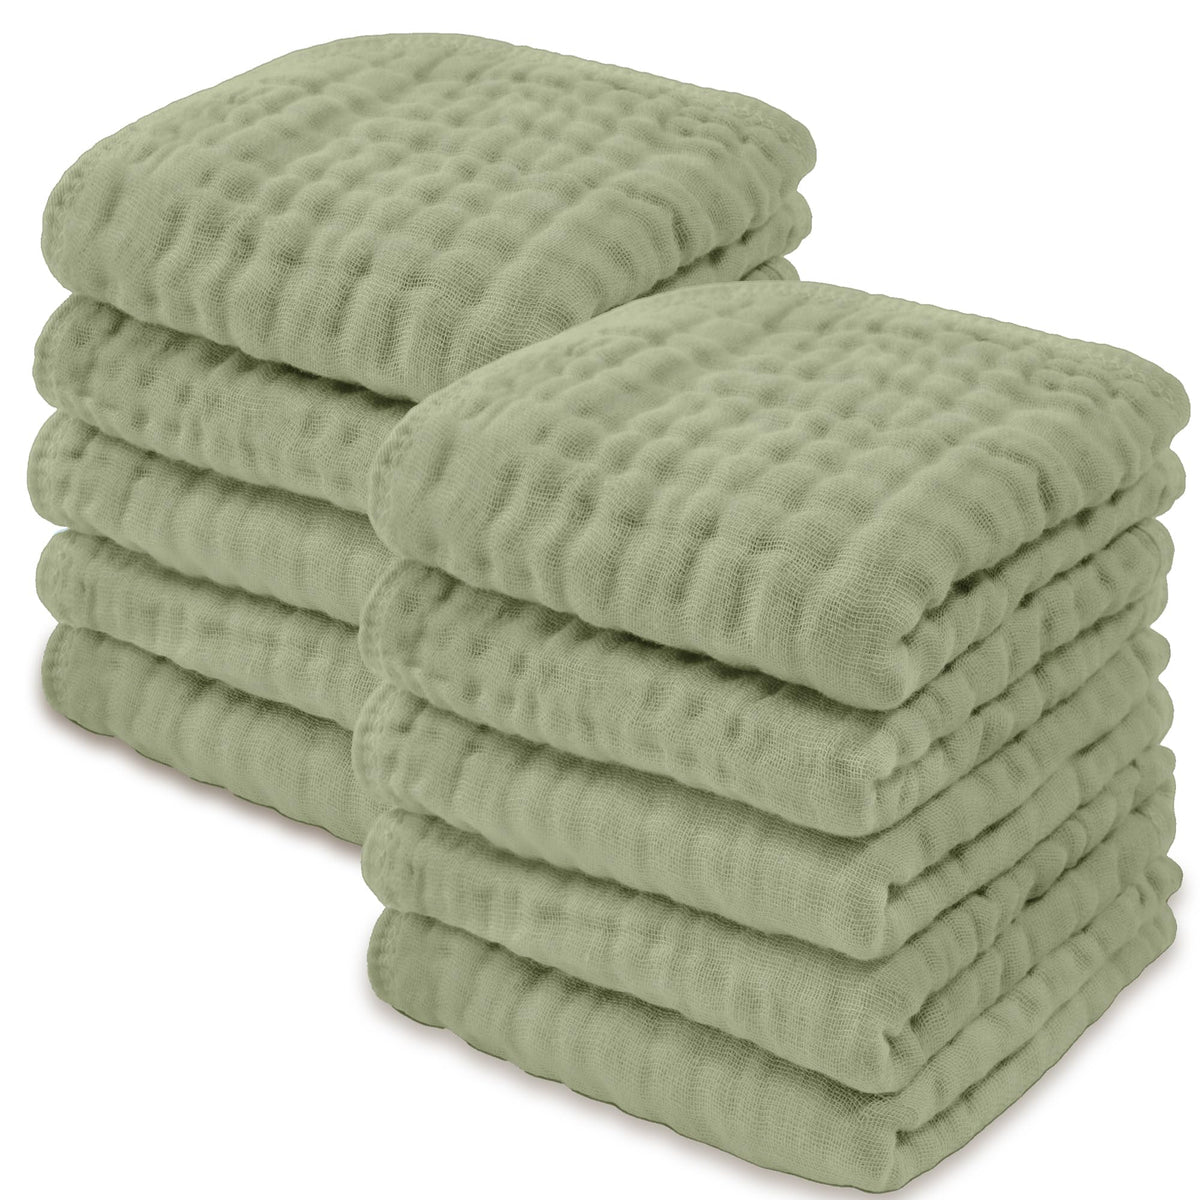 Baby Washcloths, Muslin Cotton Baby Towels, Large 10”x10” Wash Cloths Soft on Sensitive Skin, Absorbent for Boys & Girls, Newborn Baby & Toddlers Essentials Shower Registry Gift (Sage, Pack of 10)